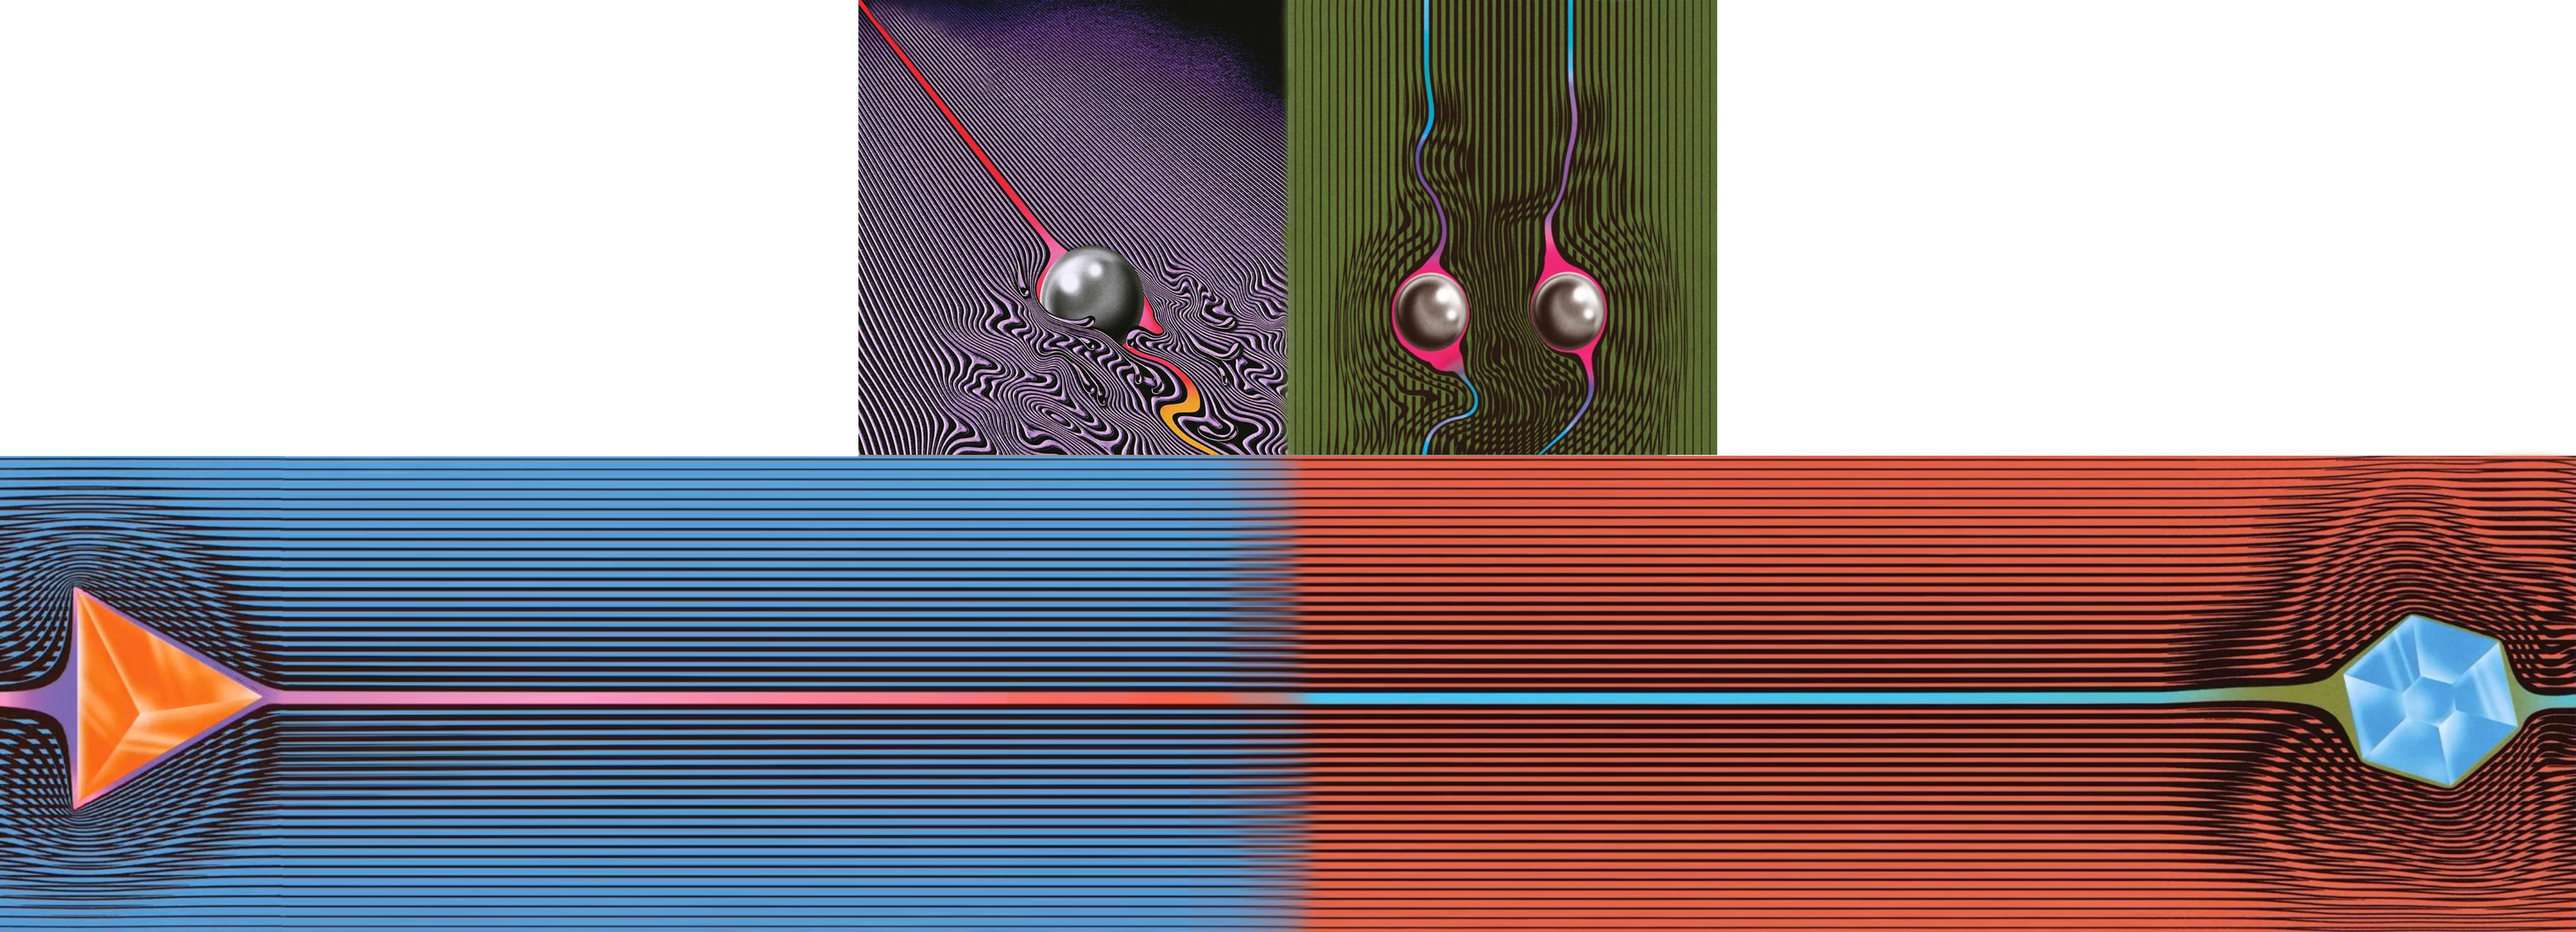 Heres A Quad Monitor Wallpaper I Made Based On The - Tame Impala Wallpaper For Iphone , HD Wallpaper & Backgrounds